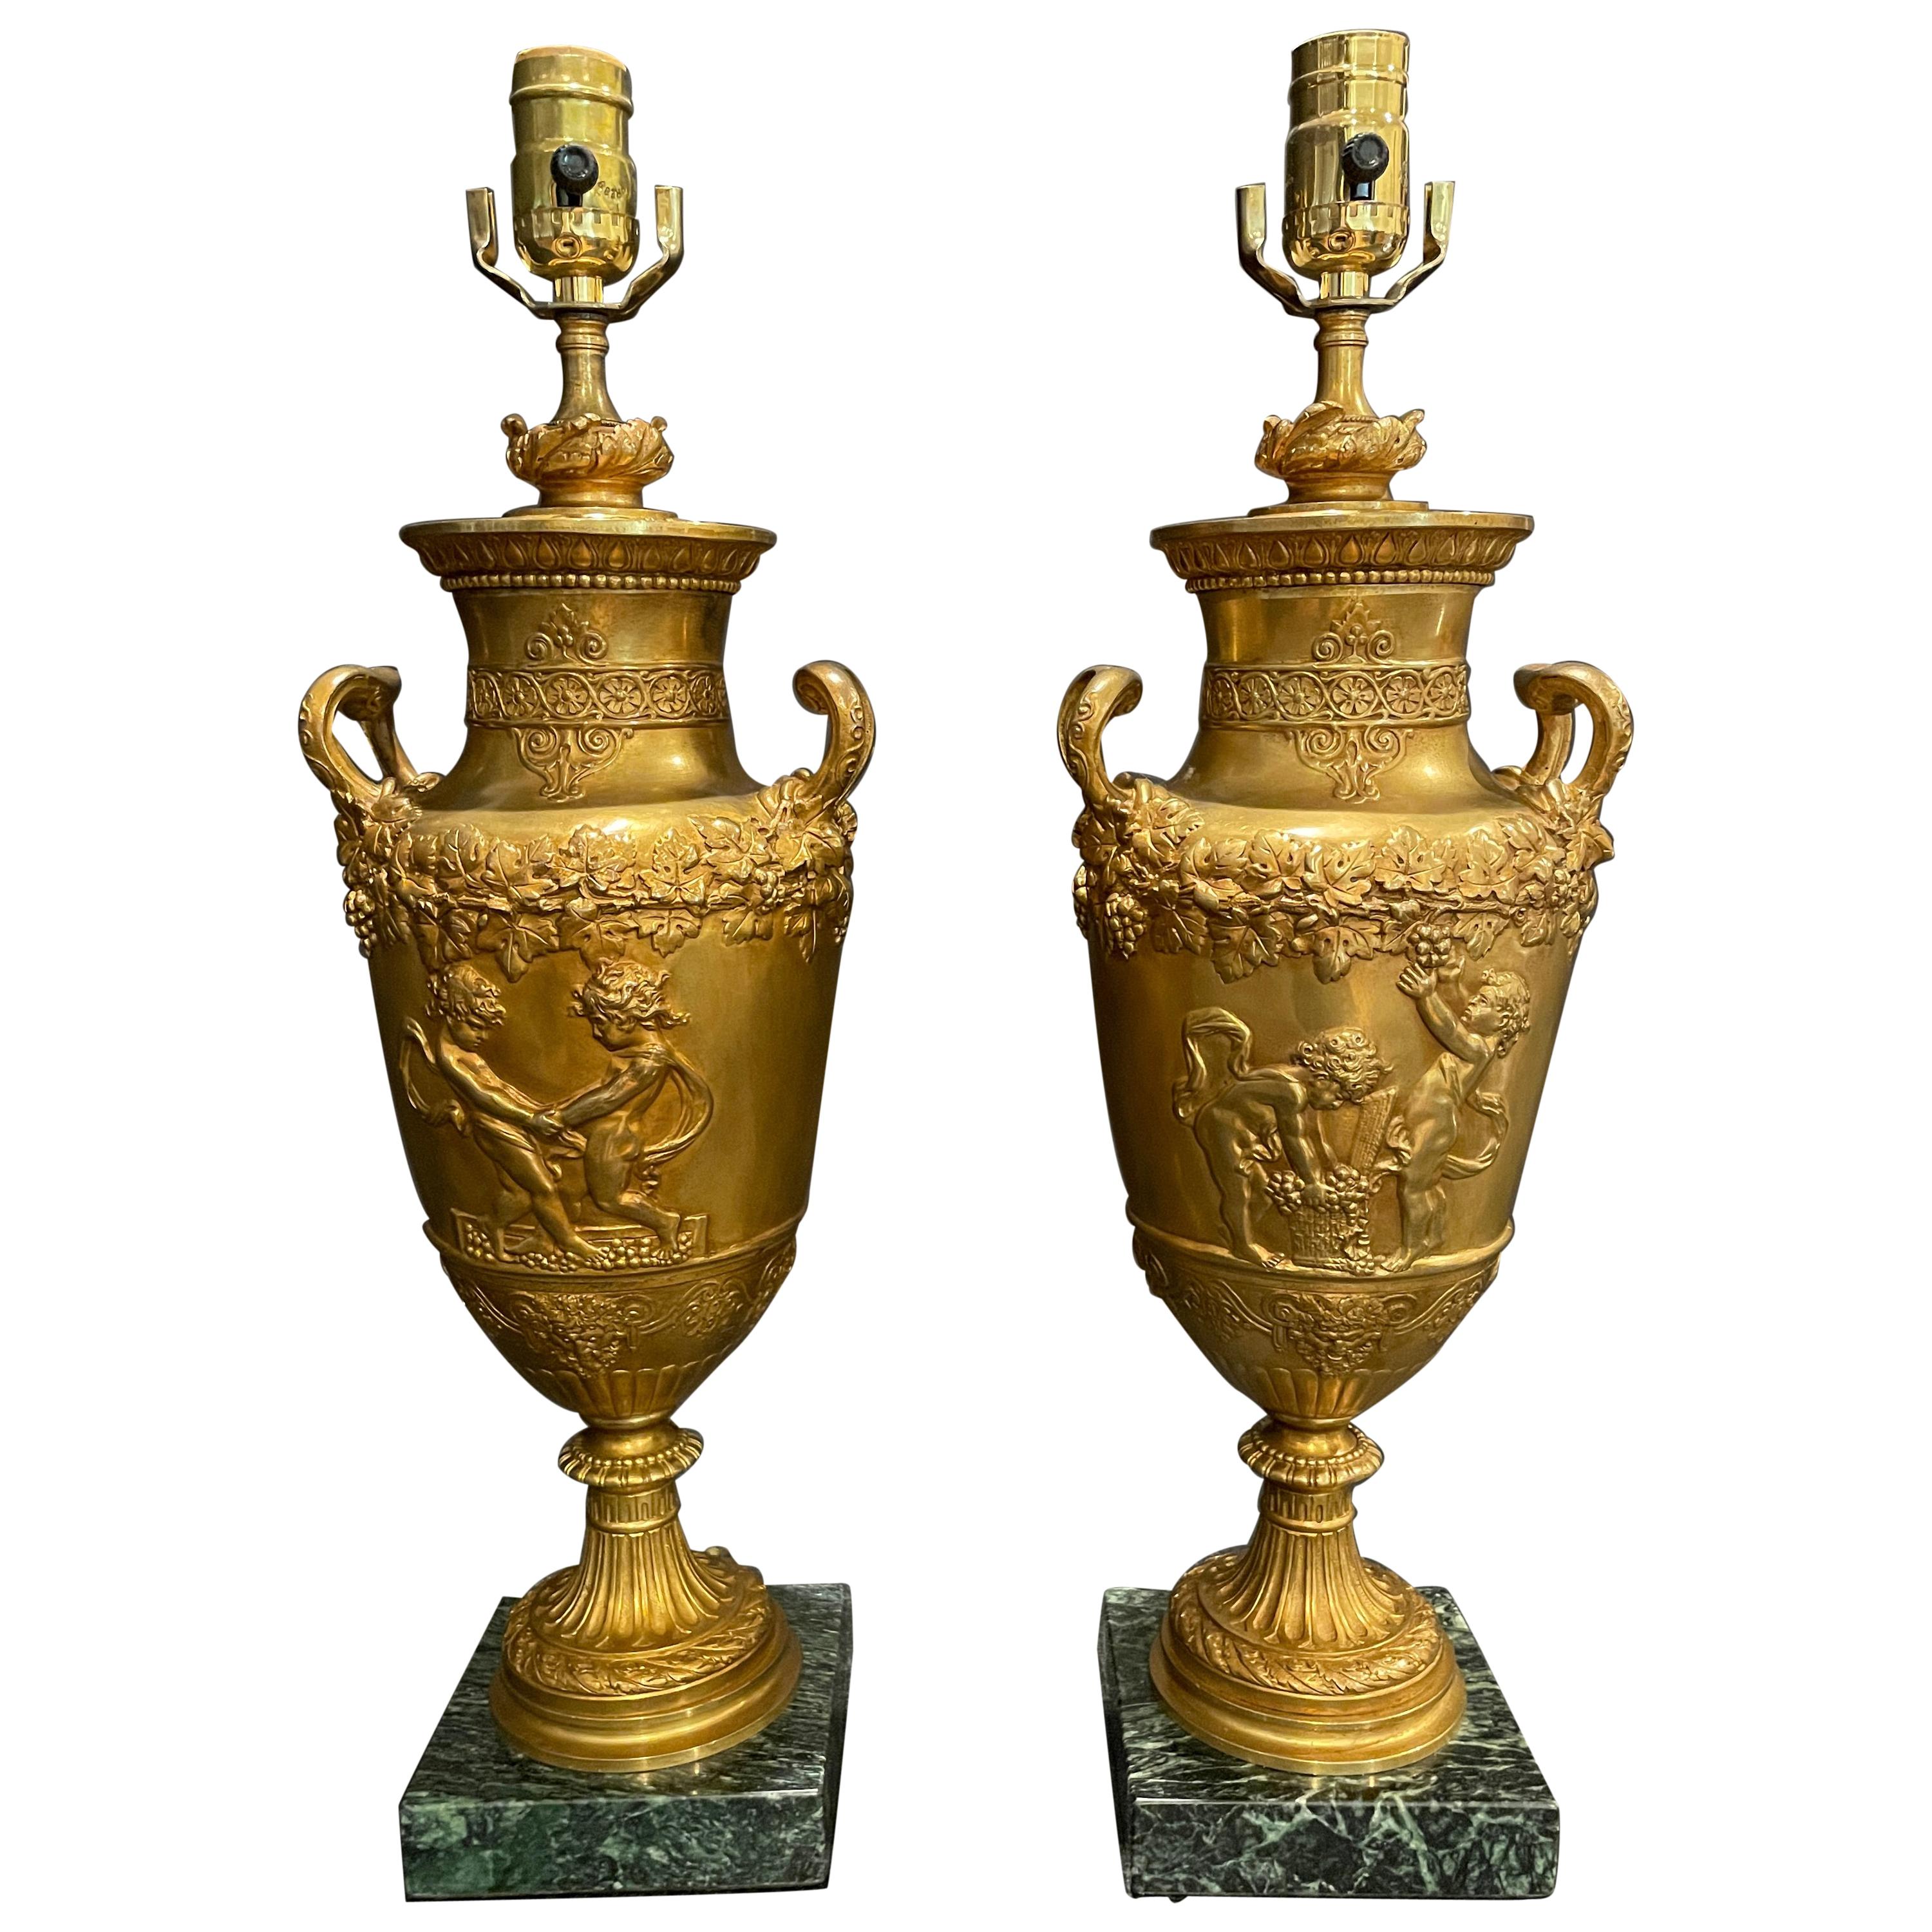 Pair of Gilt Urns as Lamps